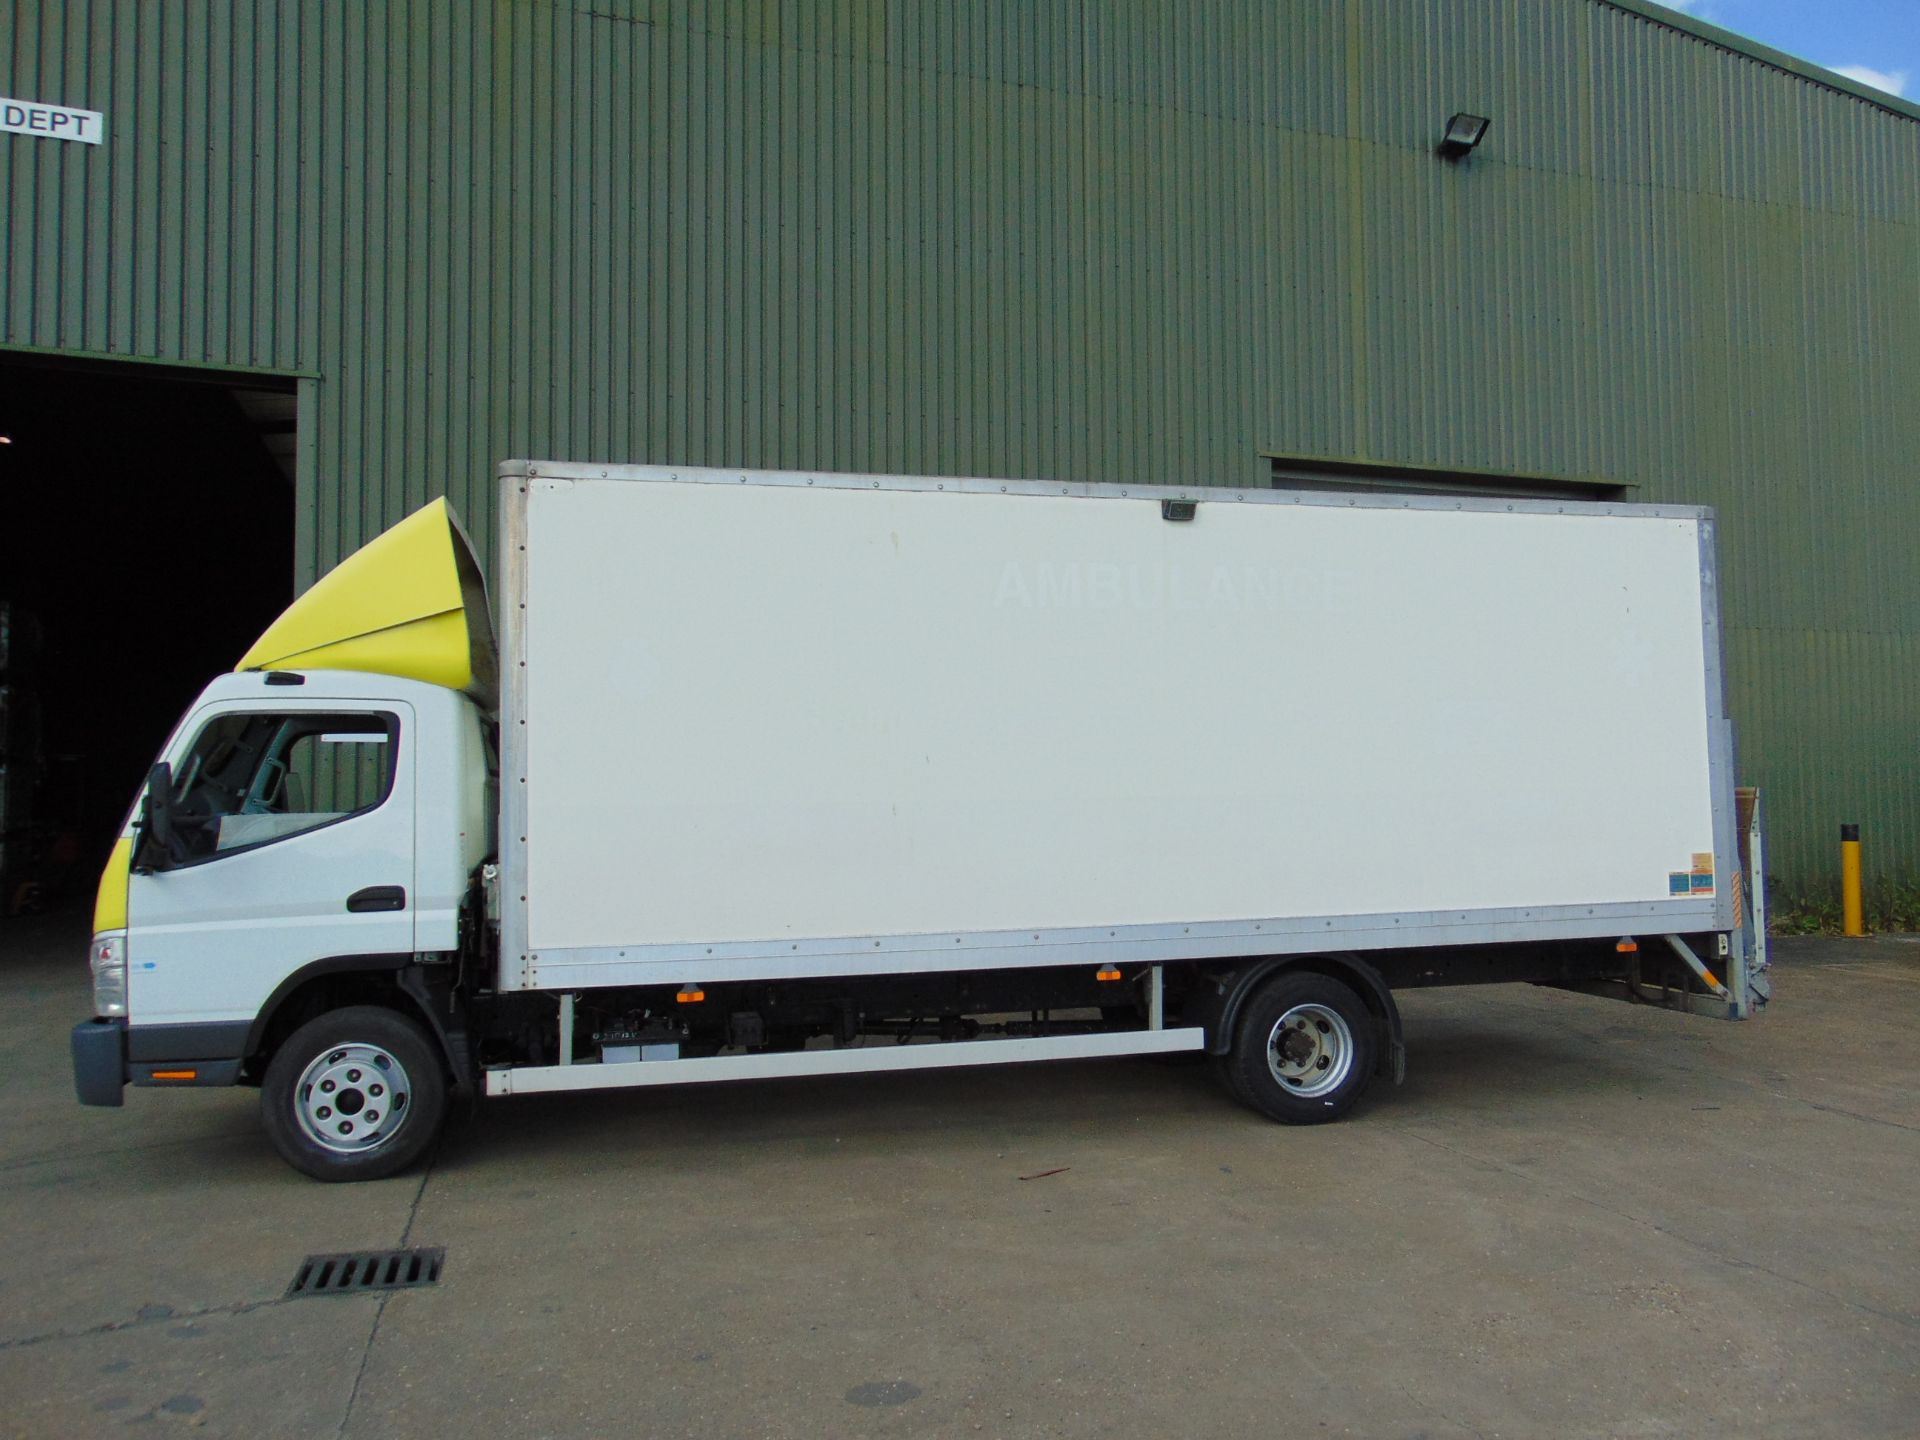 2011 Mitsubishi Fuso Canter Box lorry 7.5T - Only 5400 Miles! - Image 4 of 51